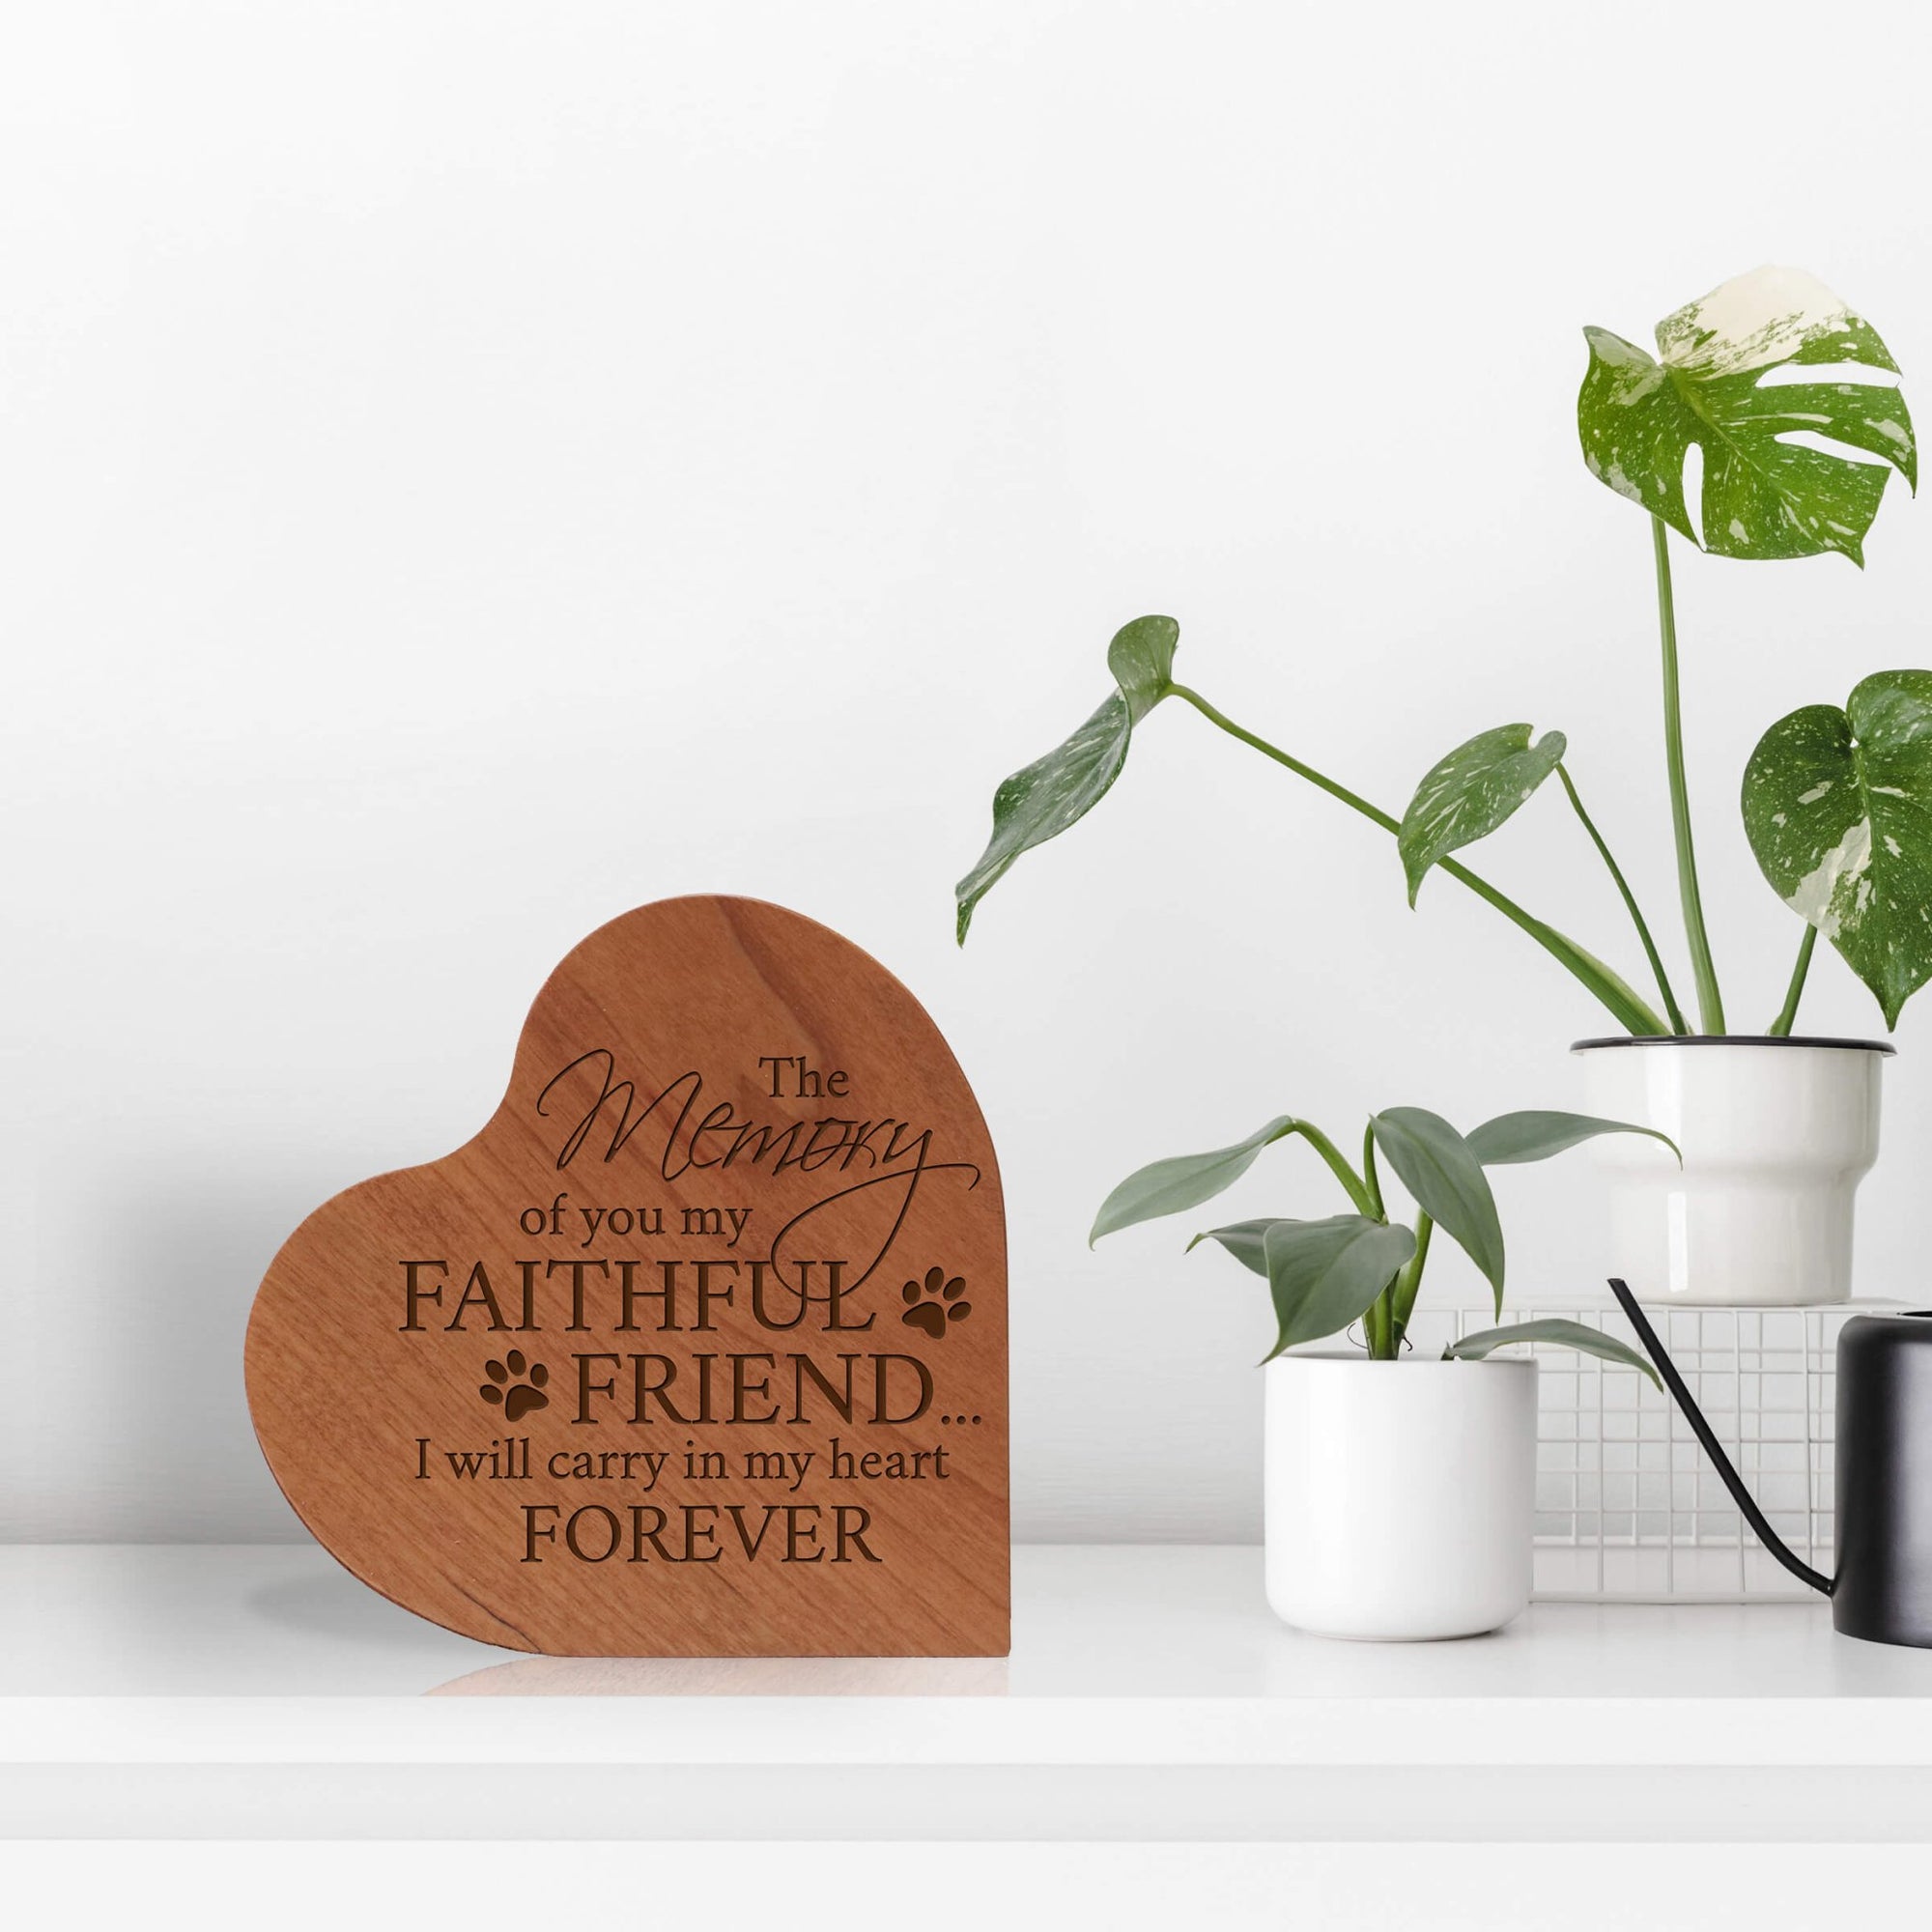 Personalized Small Heart Cremation Urn Keepsake For Pet Ashes - The Memory Of You - LifeSong Milestones